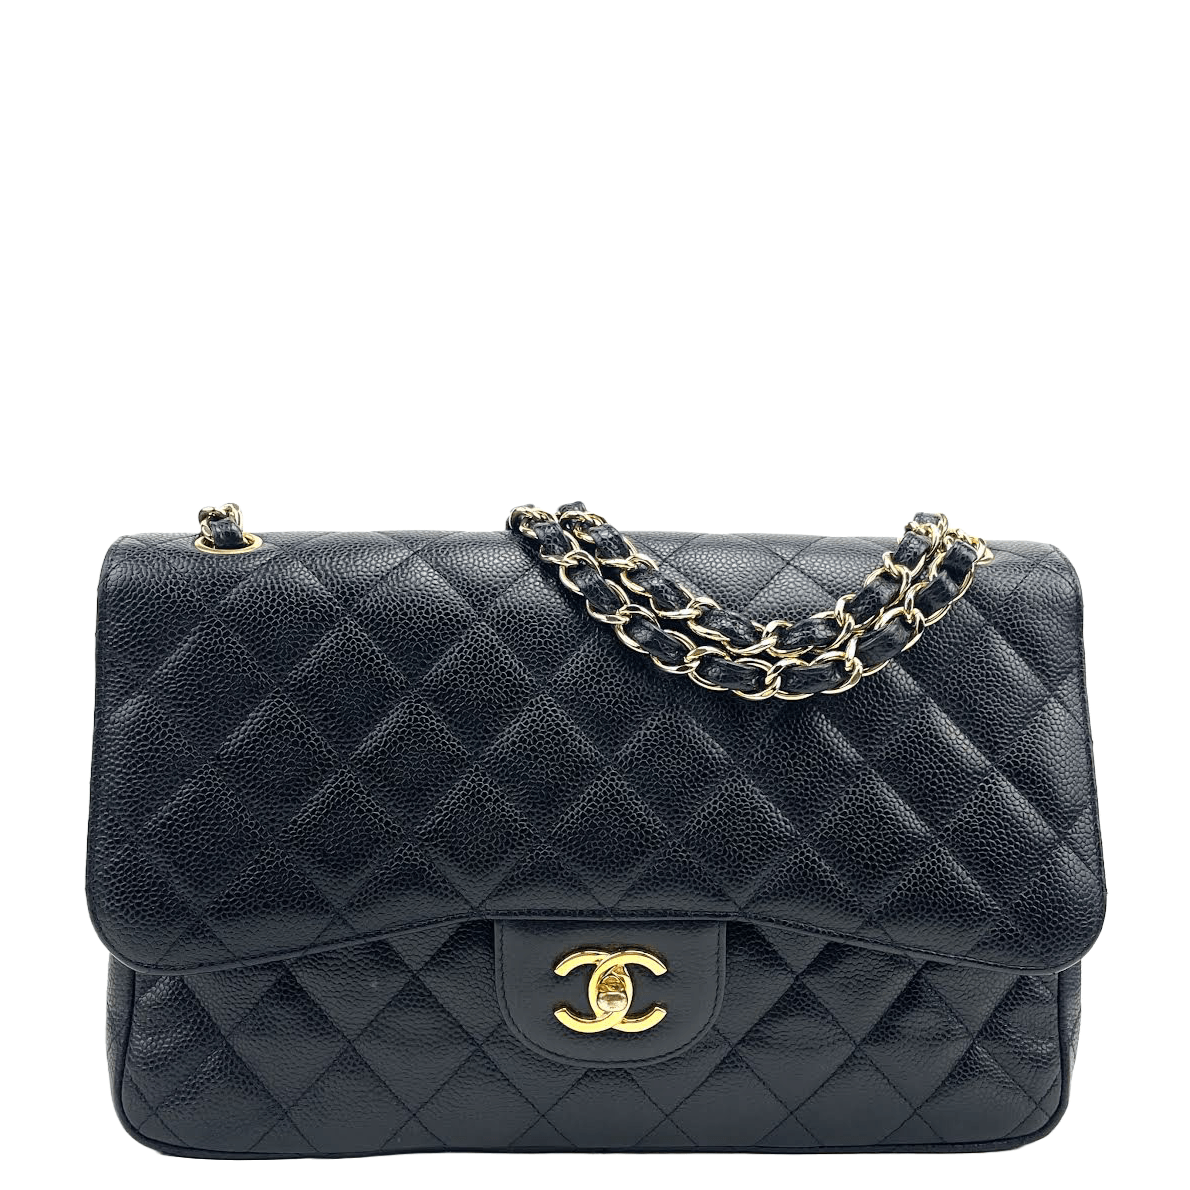 classic black quilted chanel bag